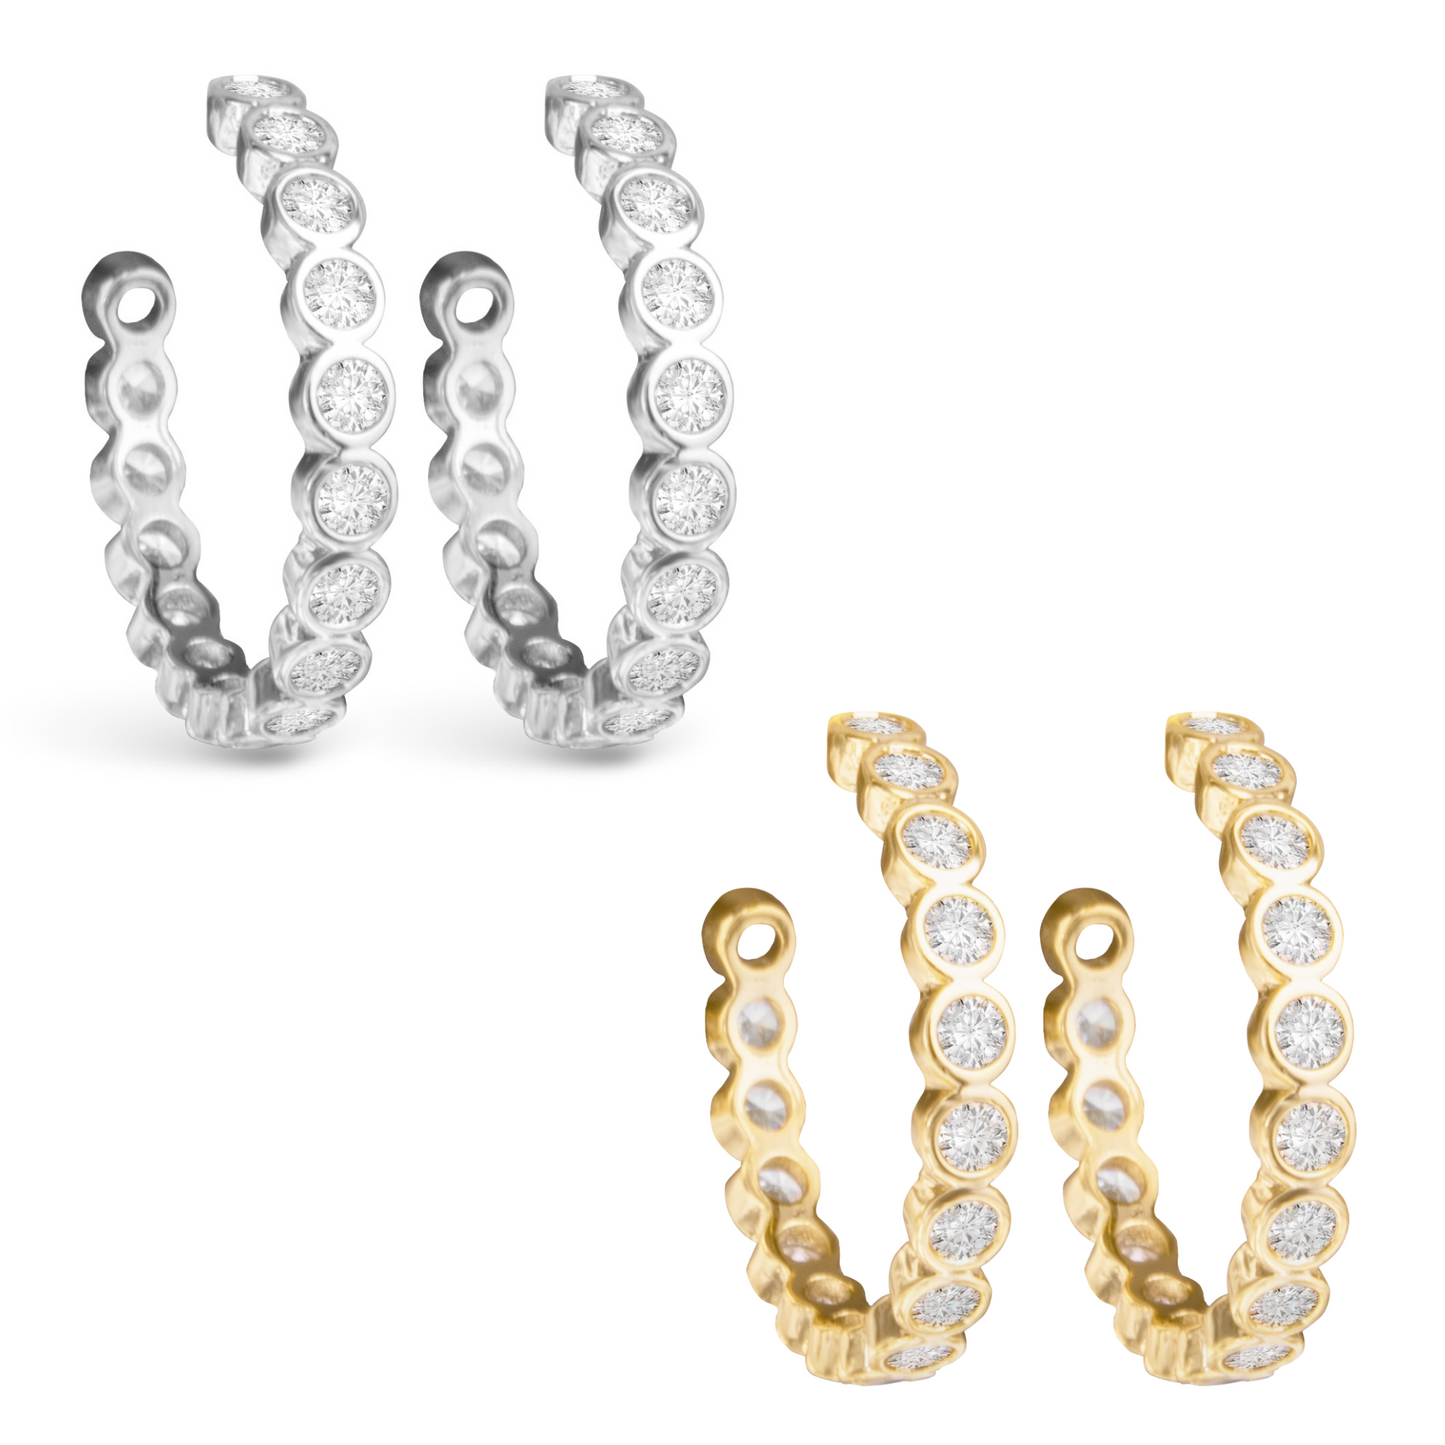 Improve your style with our Bezel Hoop Earrings, featuring a rhinestone lining that adds a touch of elegance. Choose from silver or gold to complement any outfit. Upgrade your accessory game with these beautiful and versatile hoop earrings.